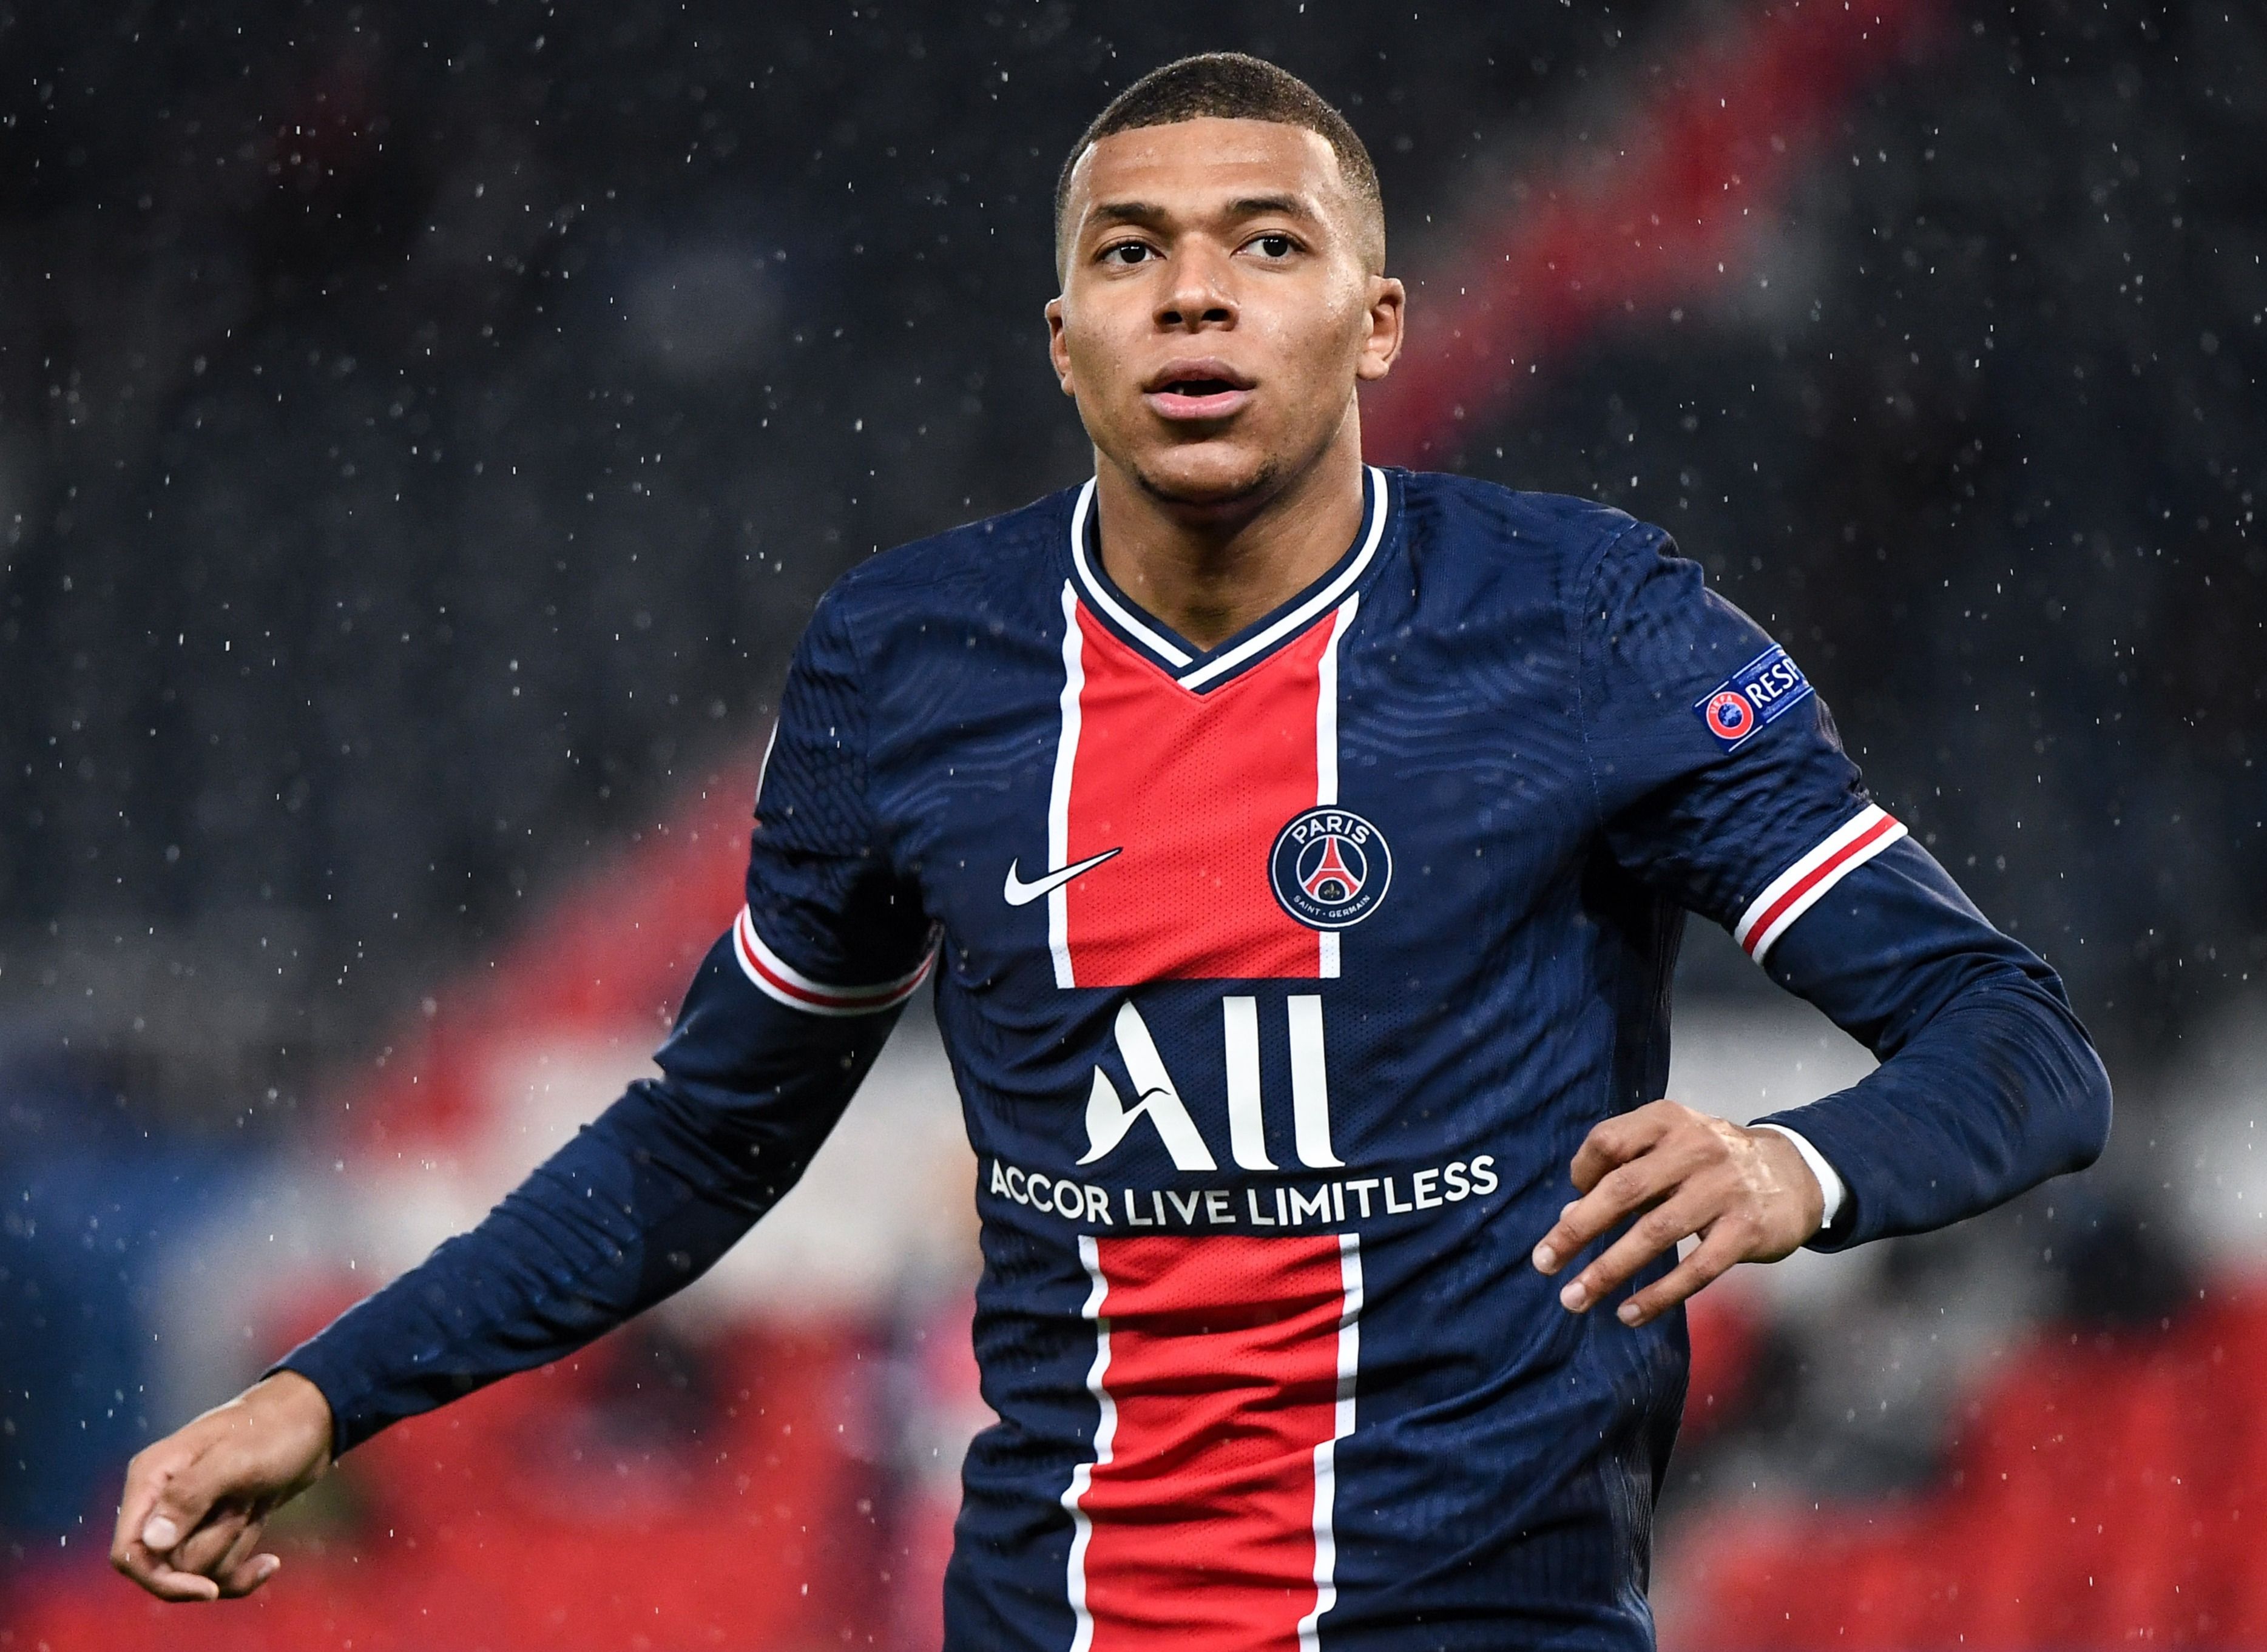 Kylian Mbappe Being Lined Up By Liverpool And Real Madrid For World Record Transfer Next Summer From PSG